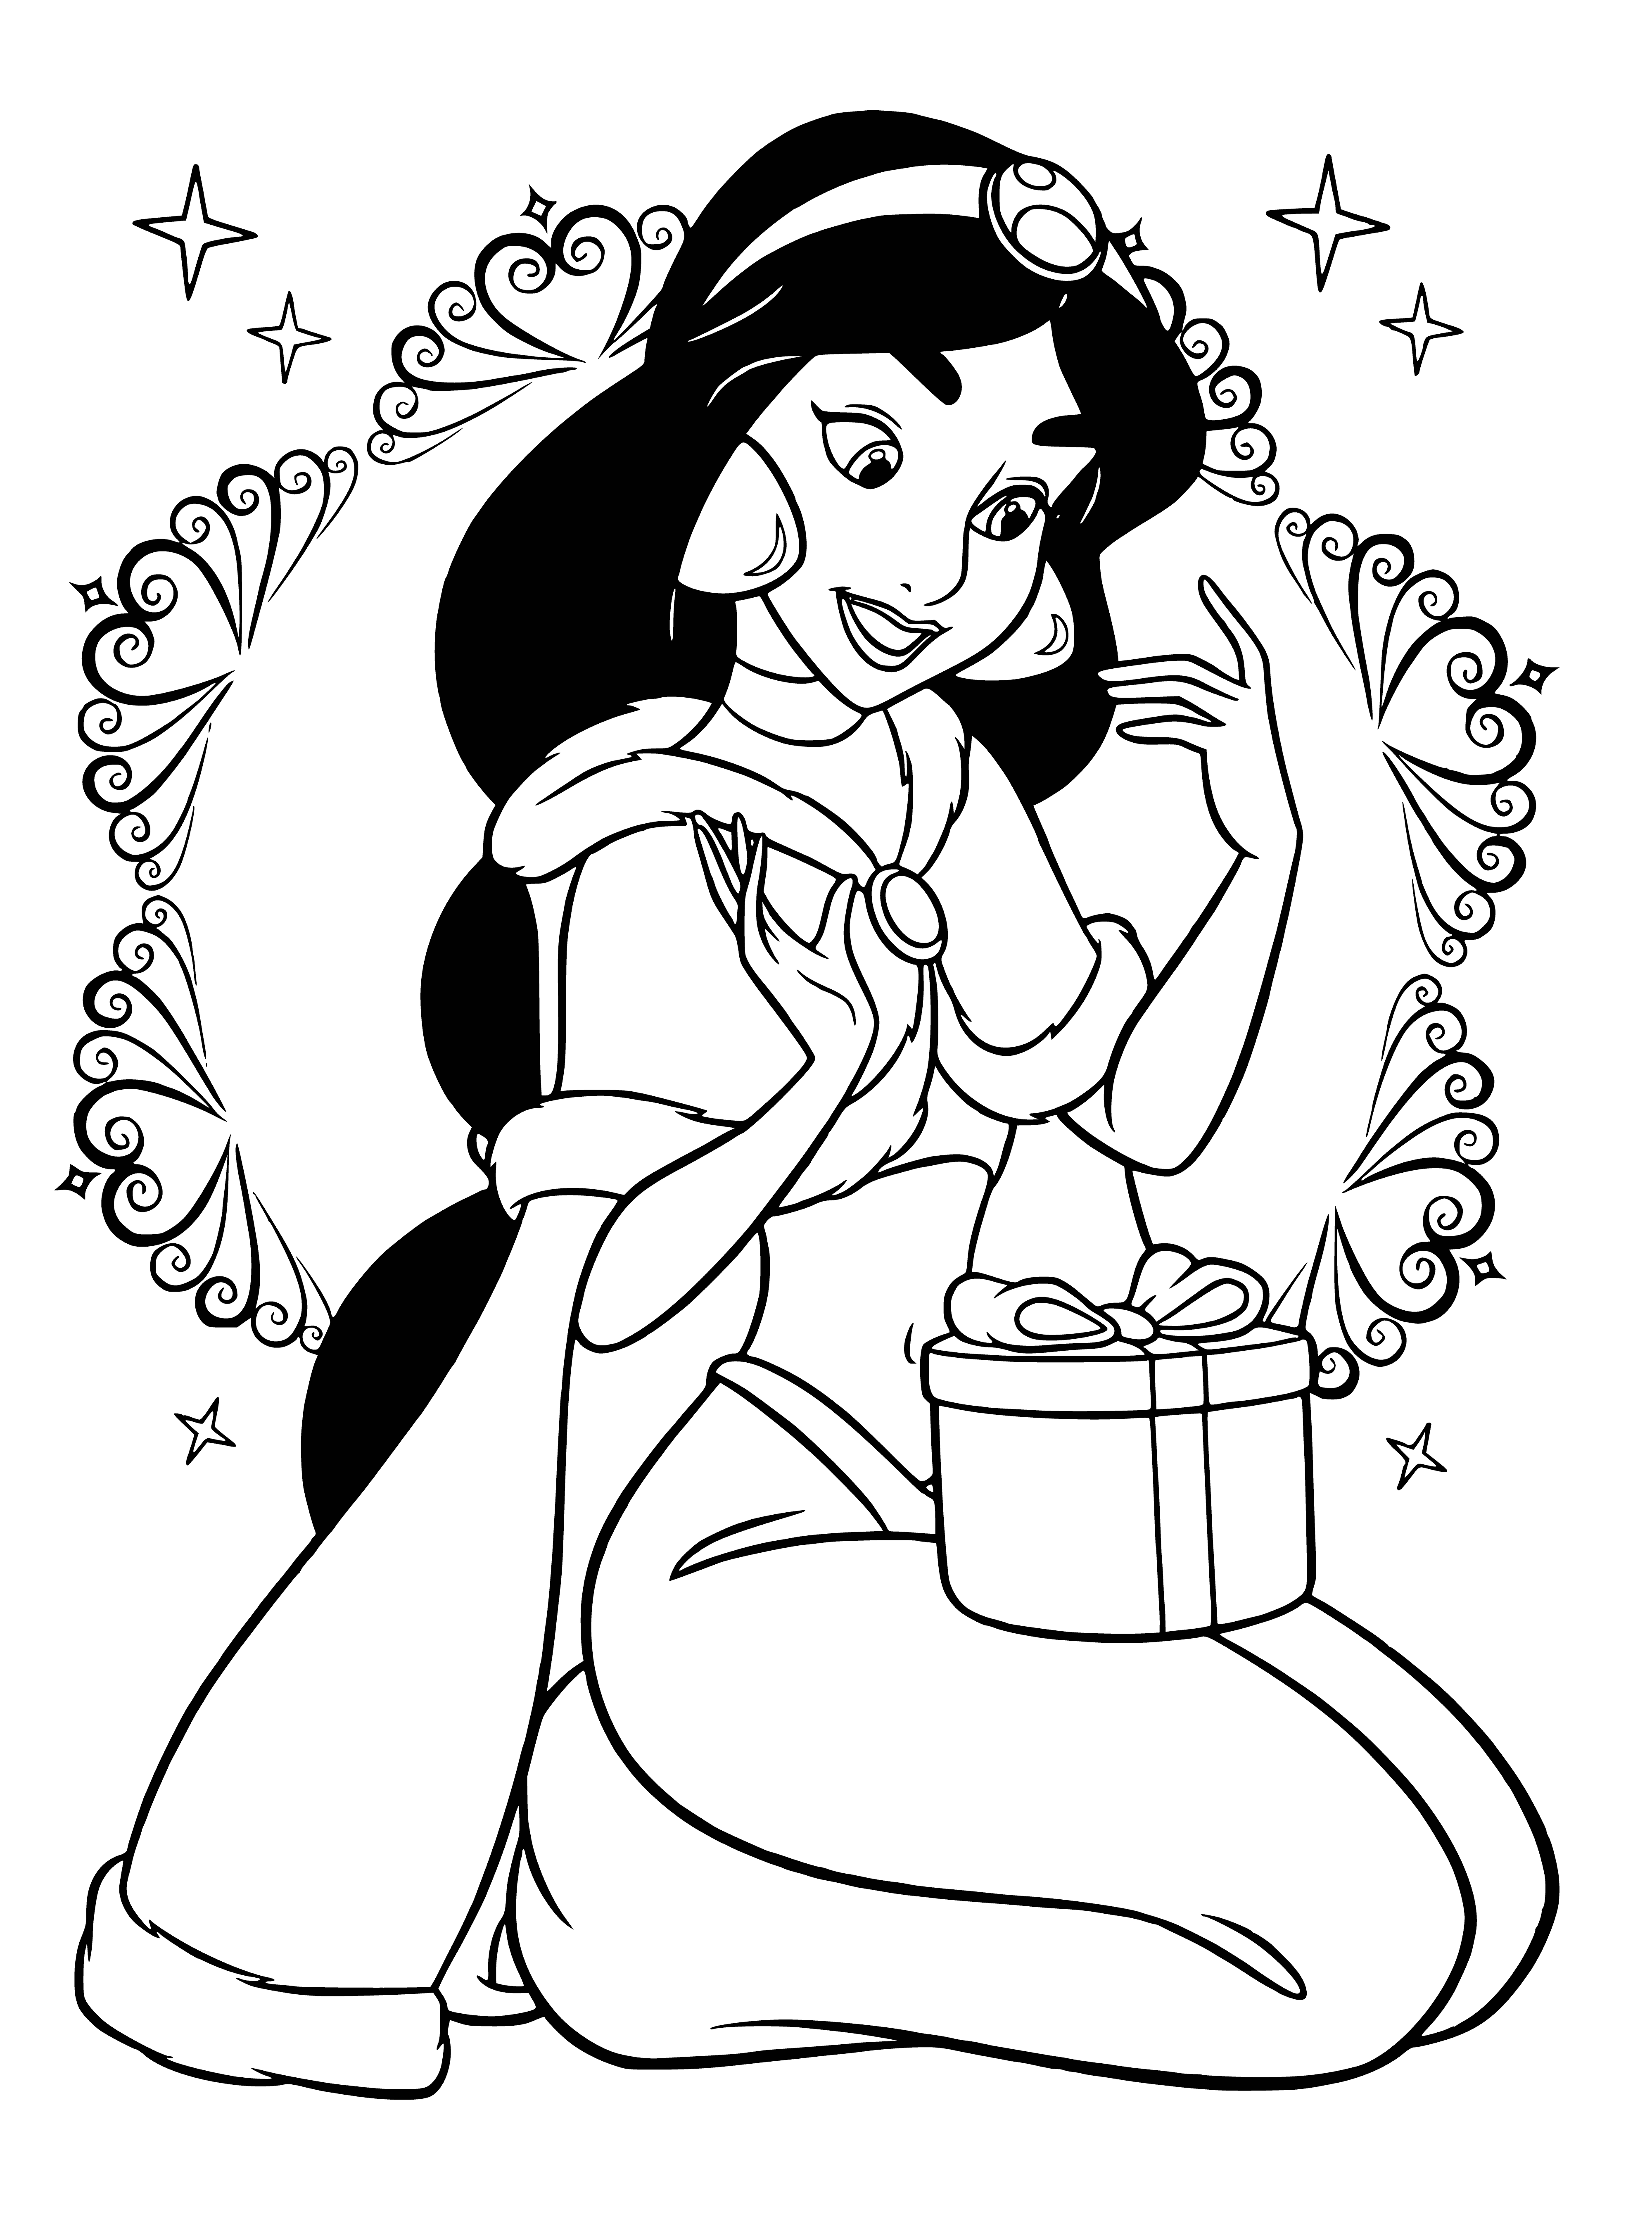 Princess Jasmine received a New Year's gift coloring page